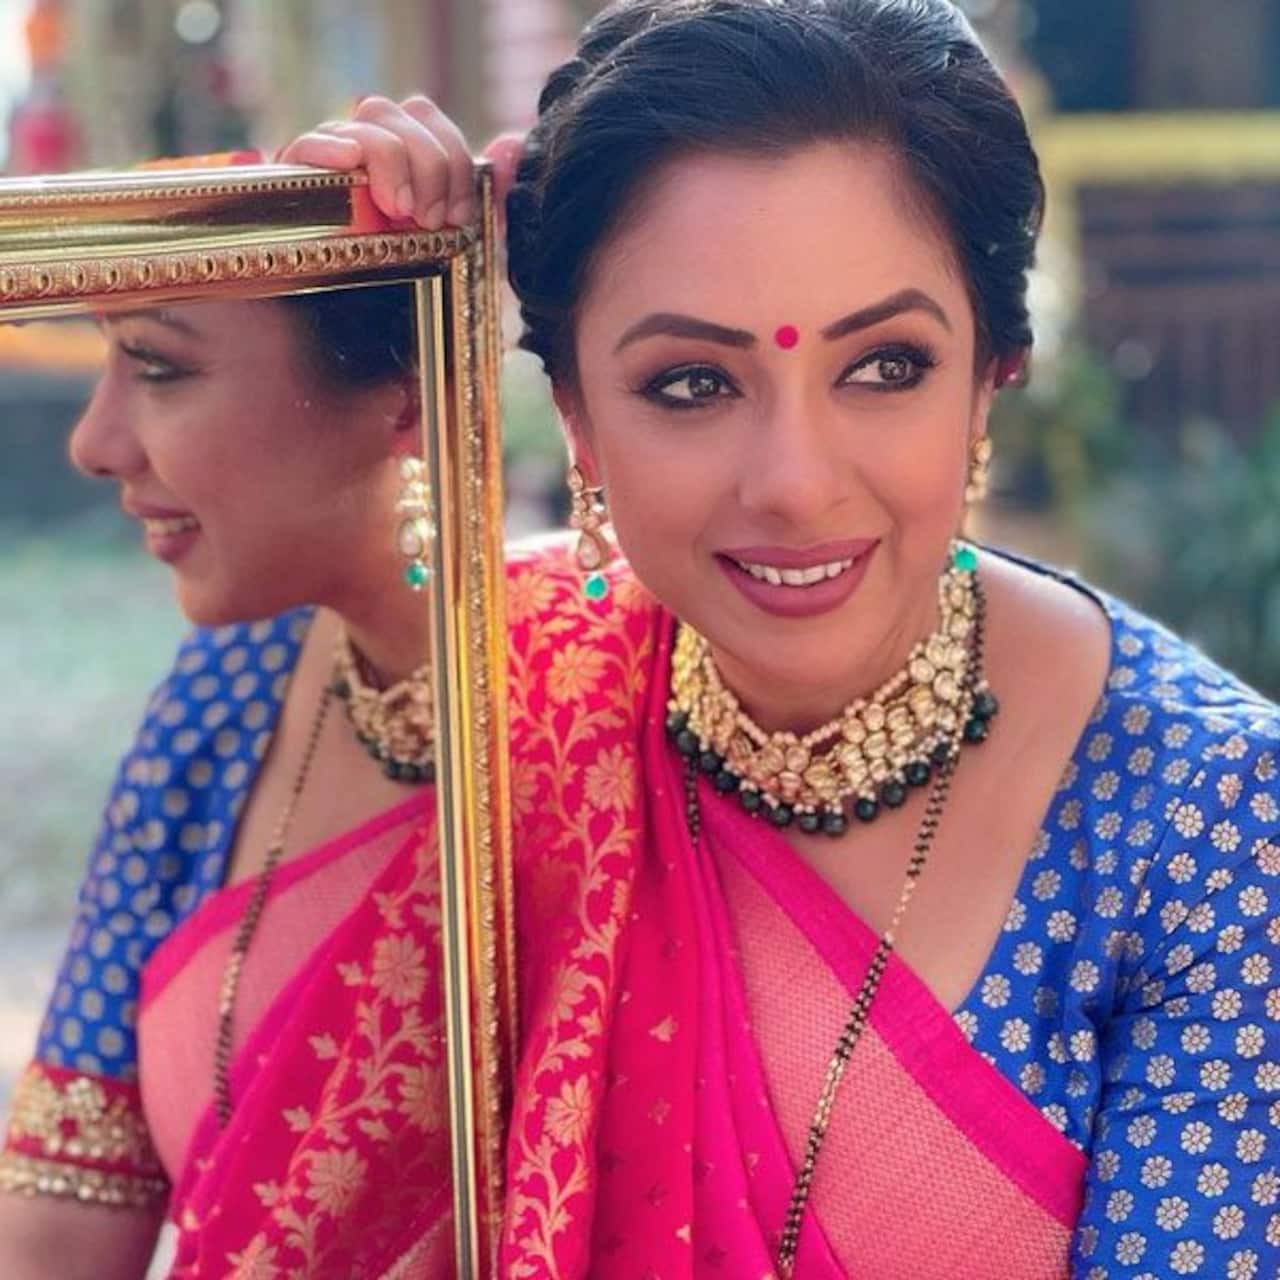 Anupamaa Star Rupali Ganguly Opens Up About Being Body Shamed By